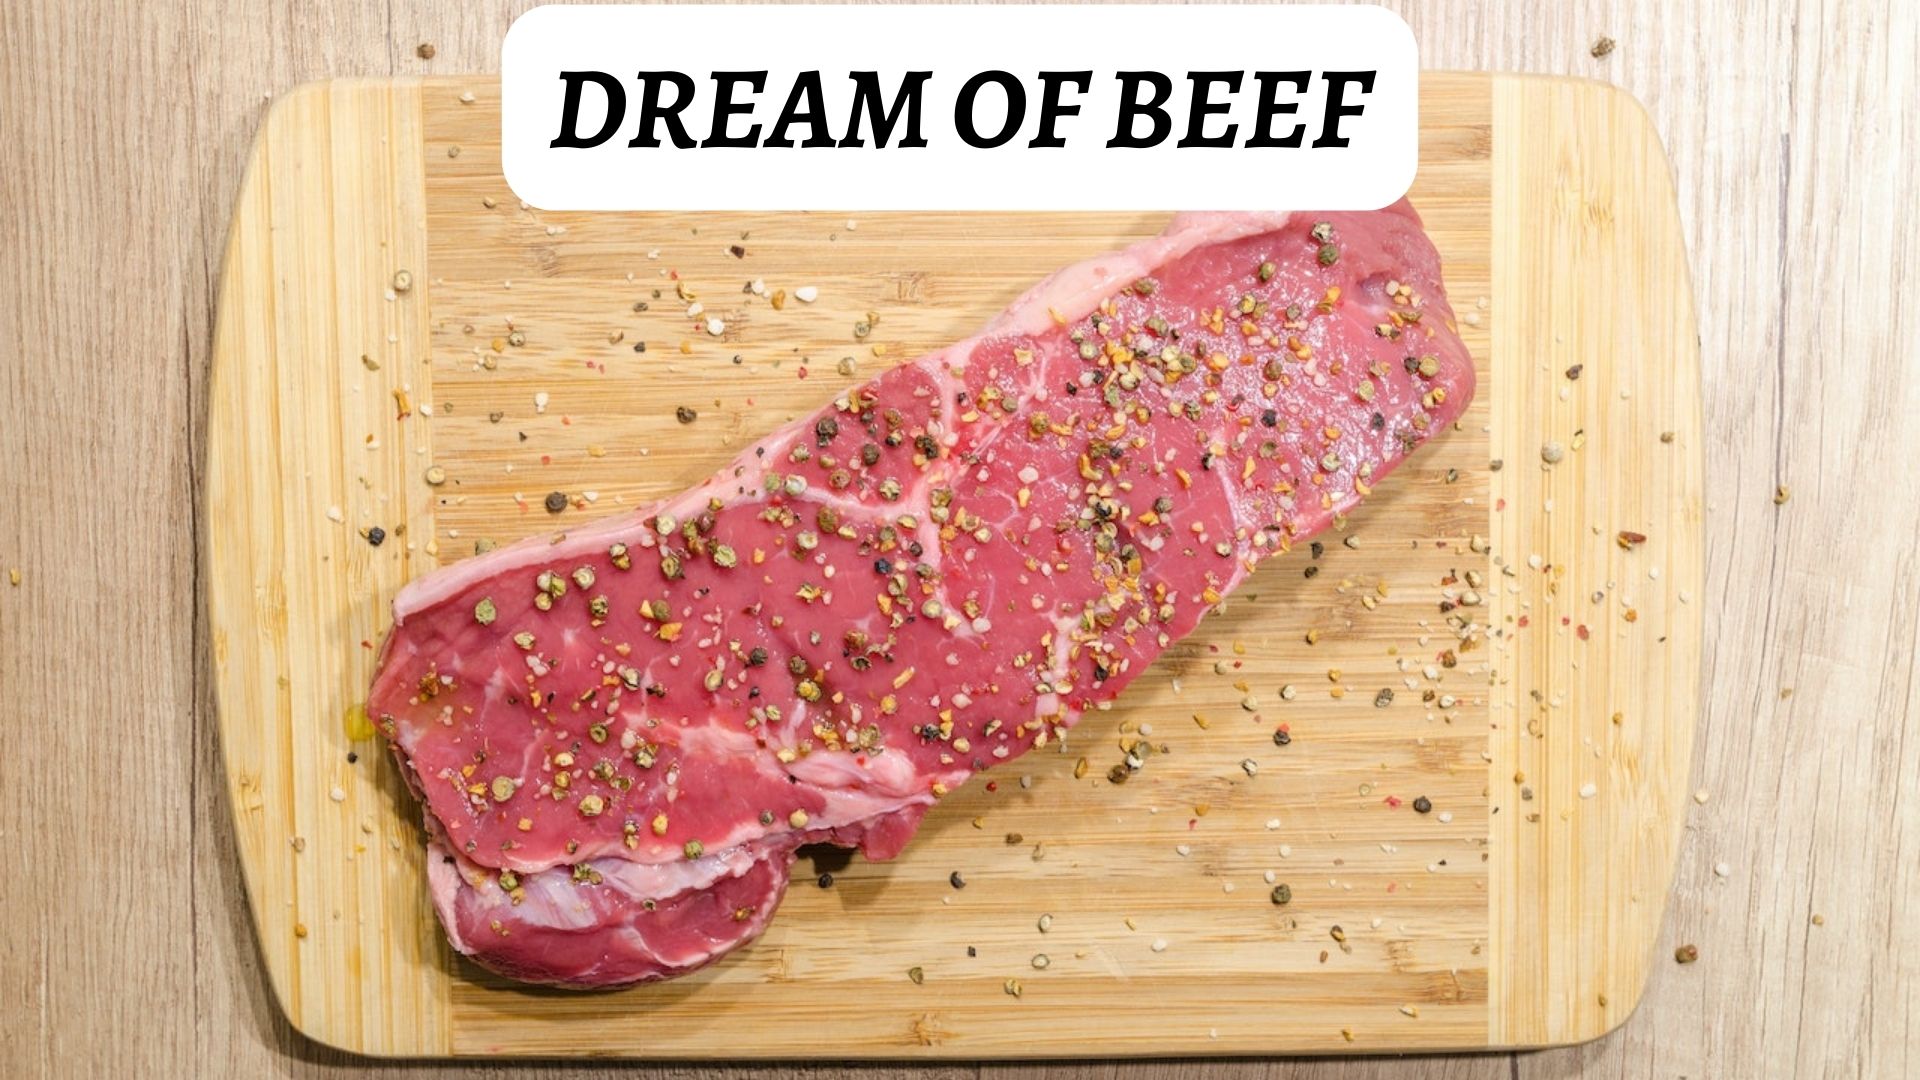 Dream Of Beef - There Will Be Happy Times In Your Household Soon